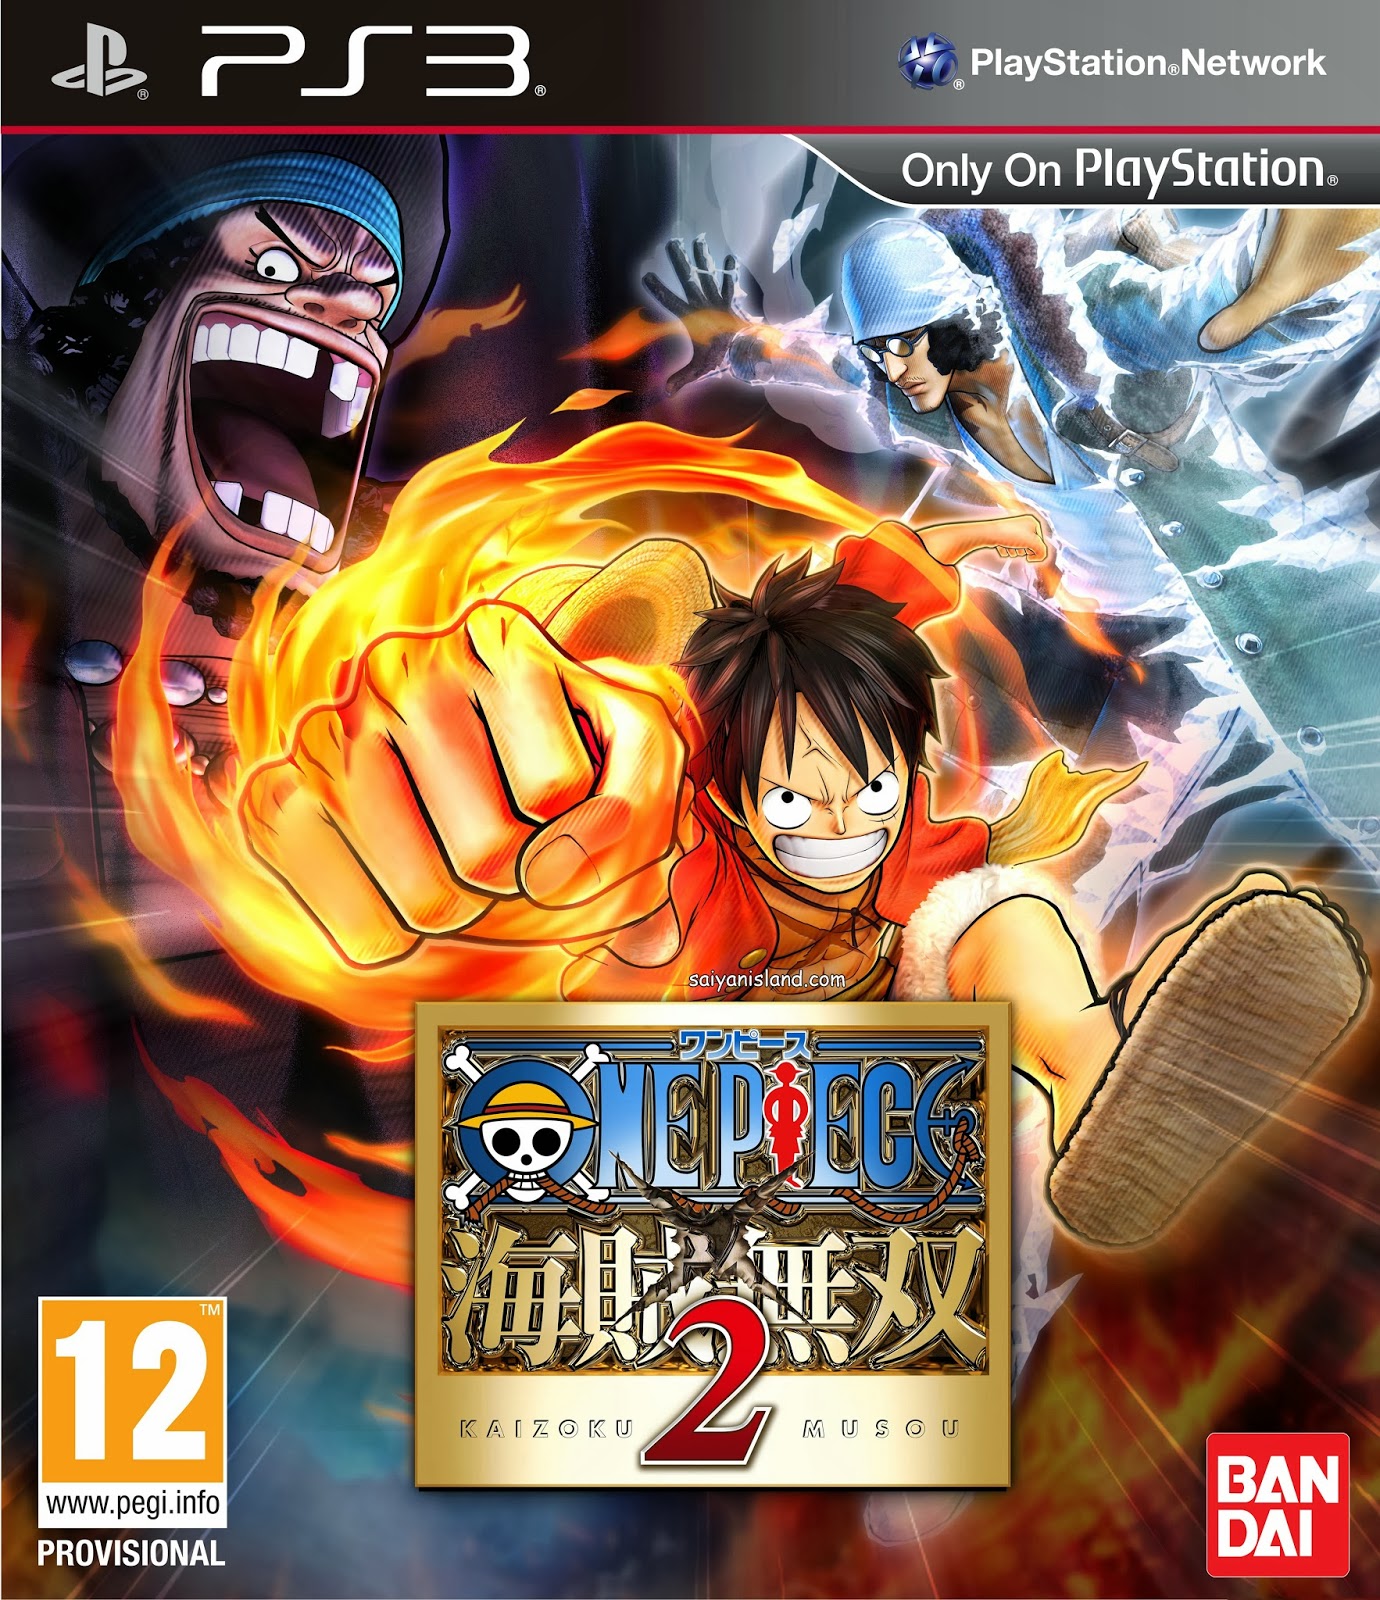 One Piece Pirate Warrior 2 PS3 Download Mediafire PC Game | Gamet